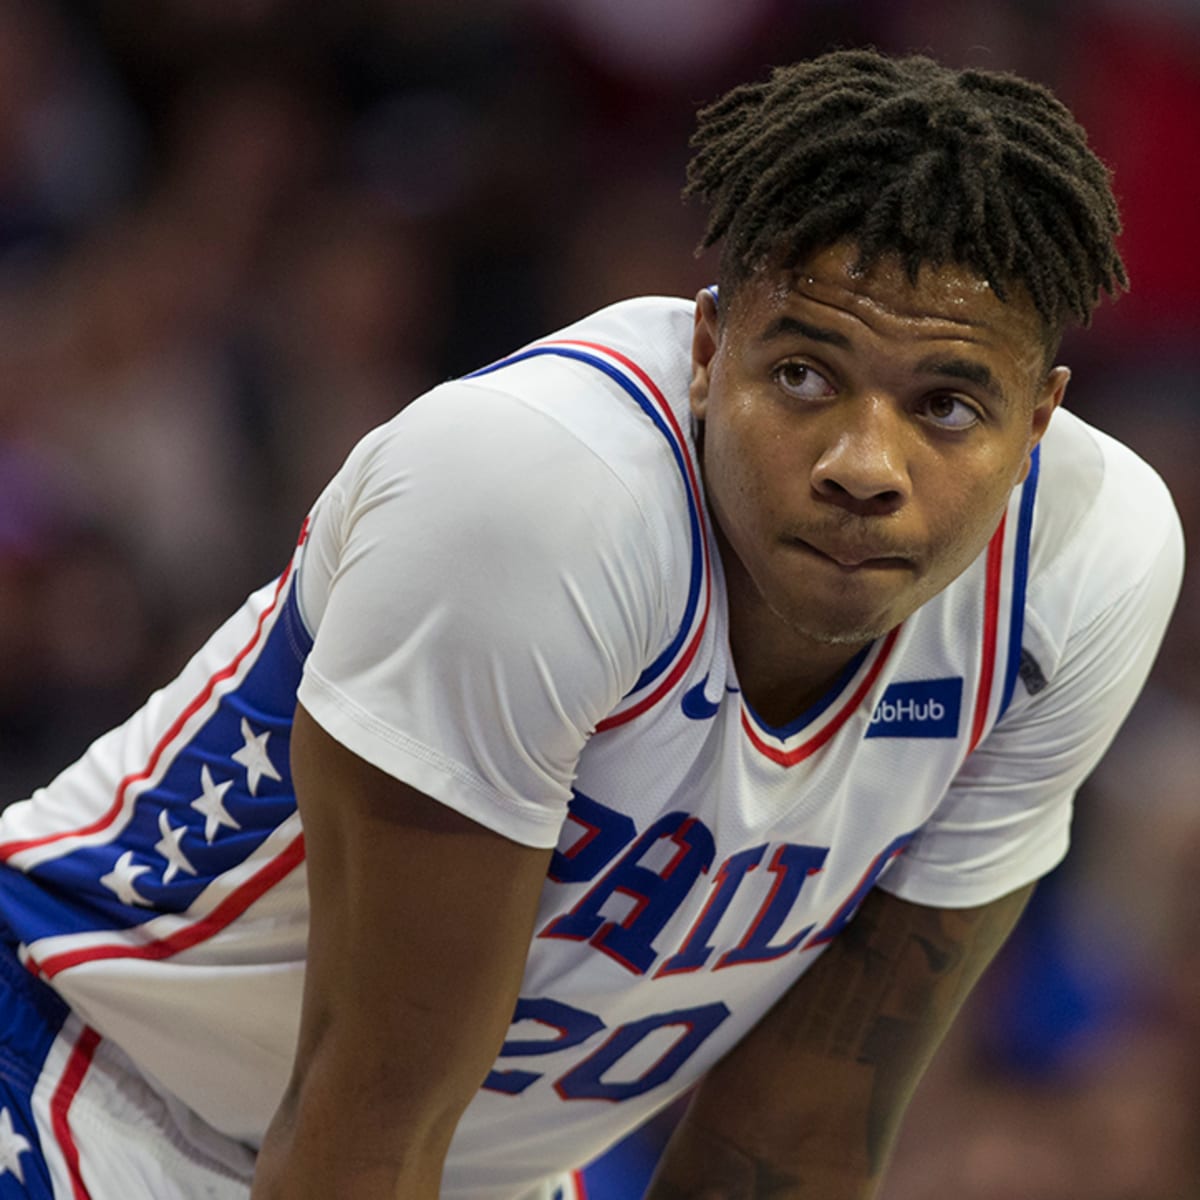 Philadelphia 76ers: What to make of Markelle Fultz's first game back